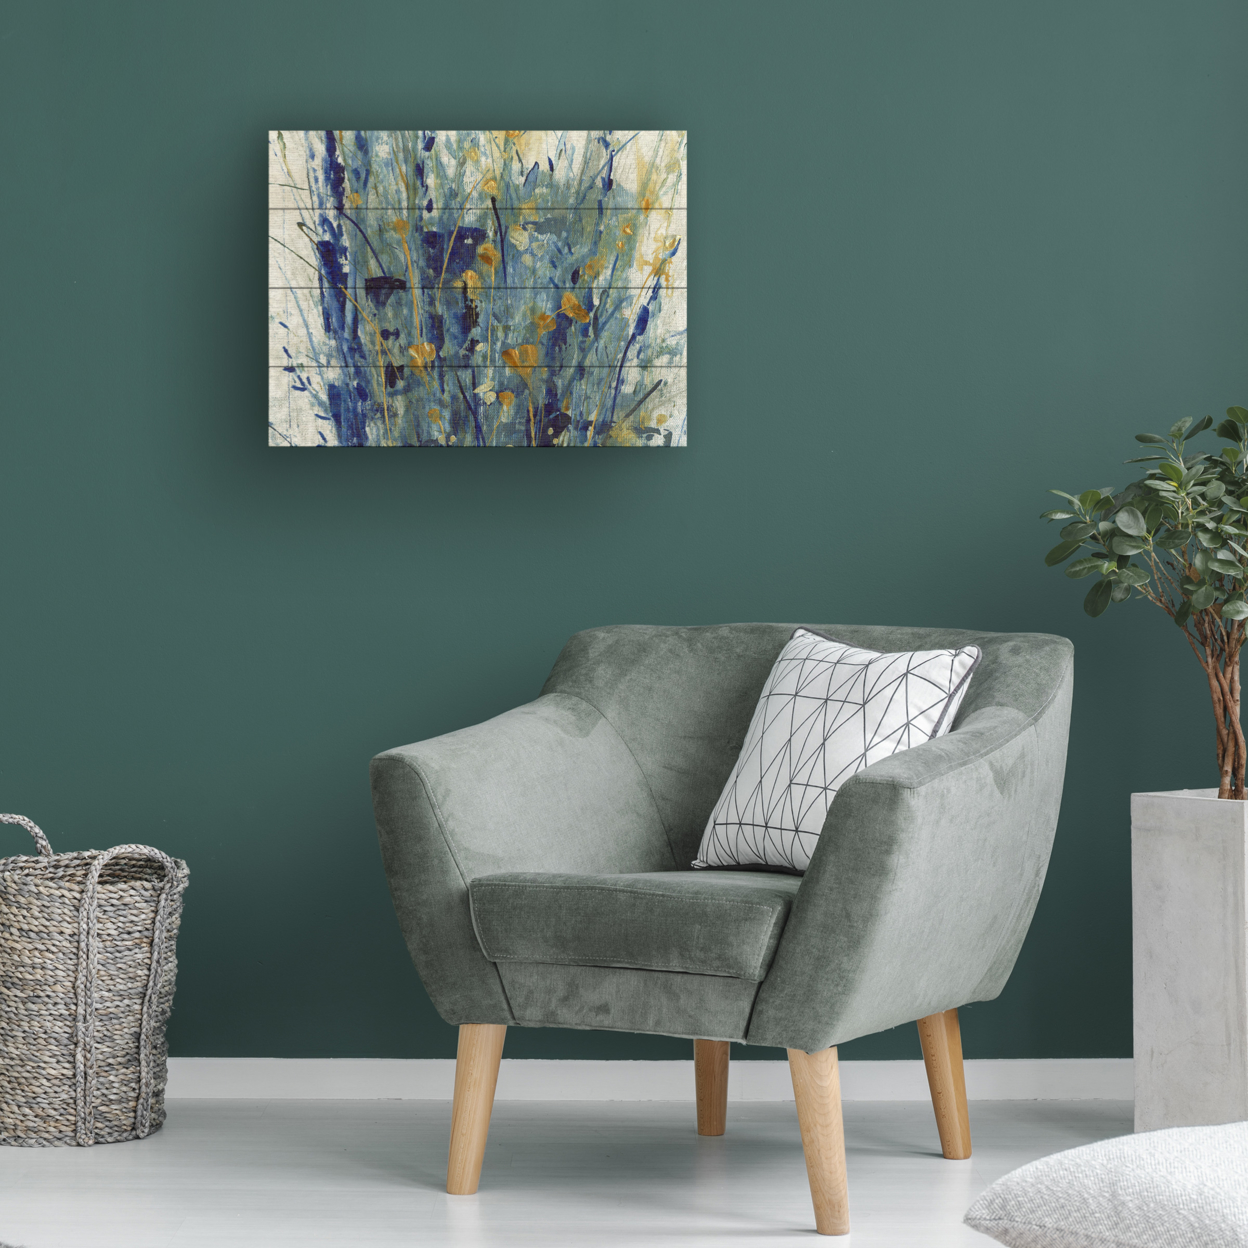 Wall Art 12 X 16 Inches Titled Indigo Floral Ii Ready To Hang Printed On Wooden Planks